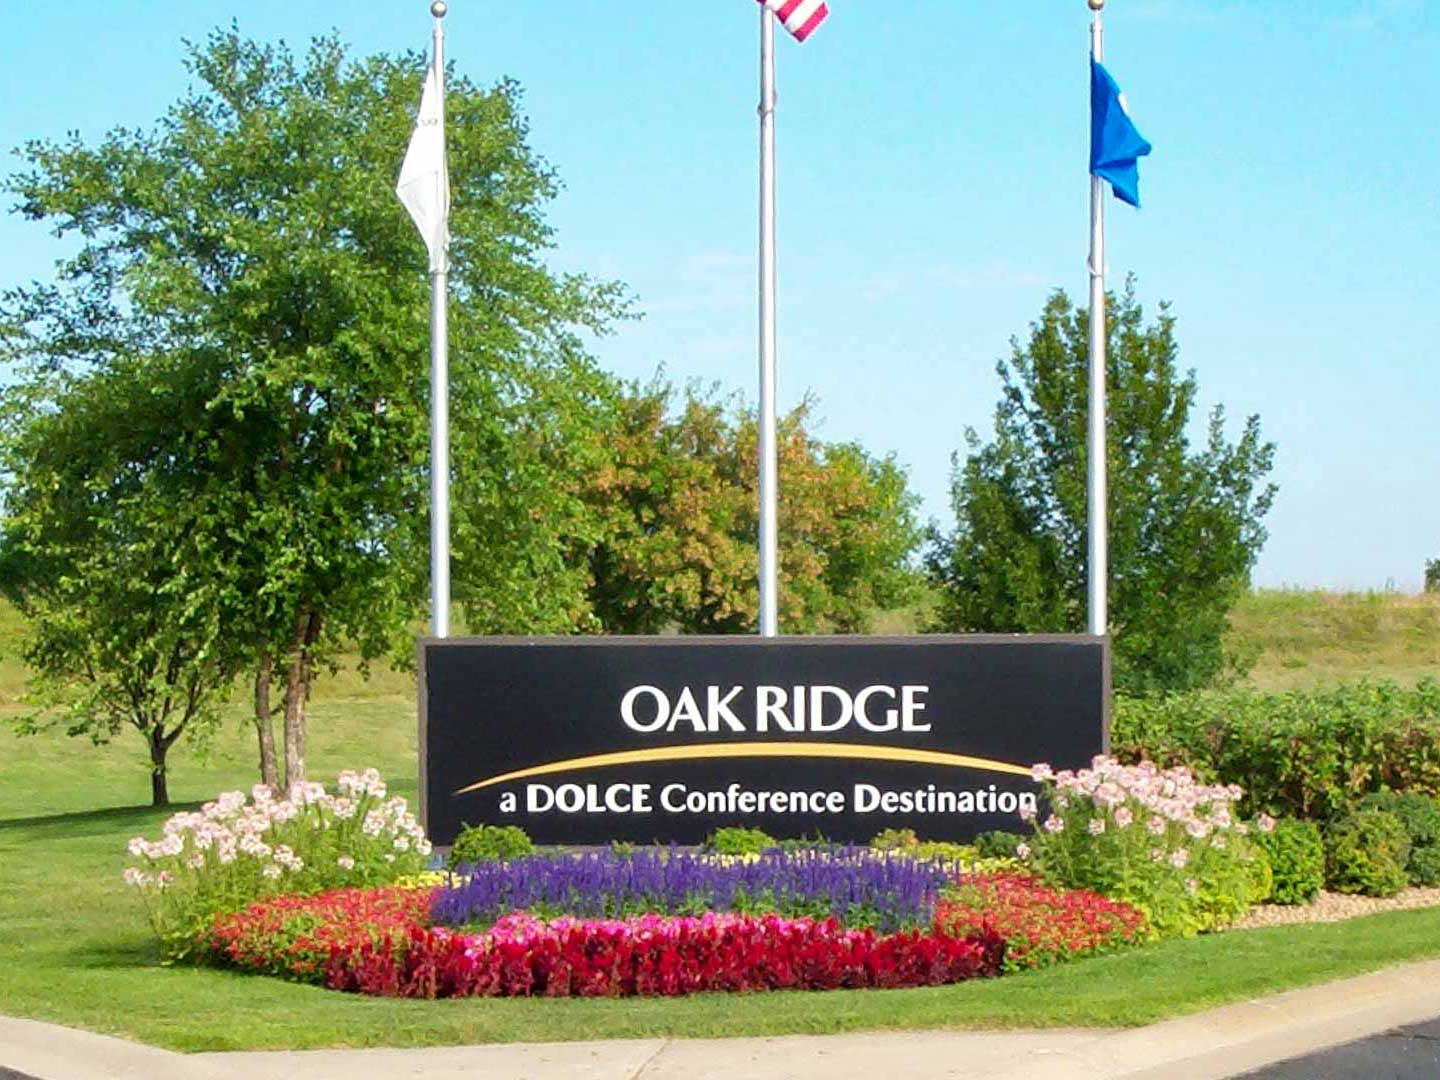 Oak Ridge commercial property landscaping by Greenside Inc in Savage, MN.